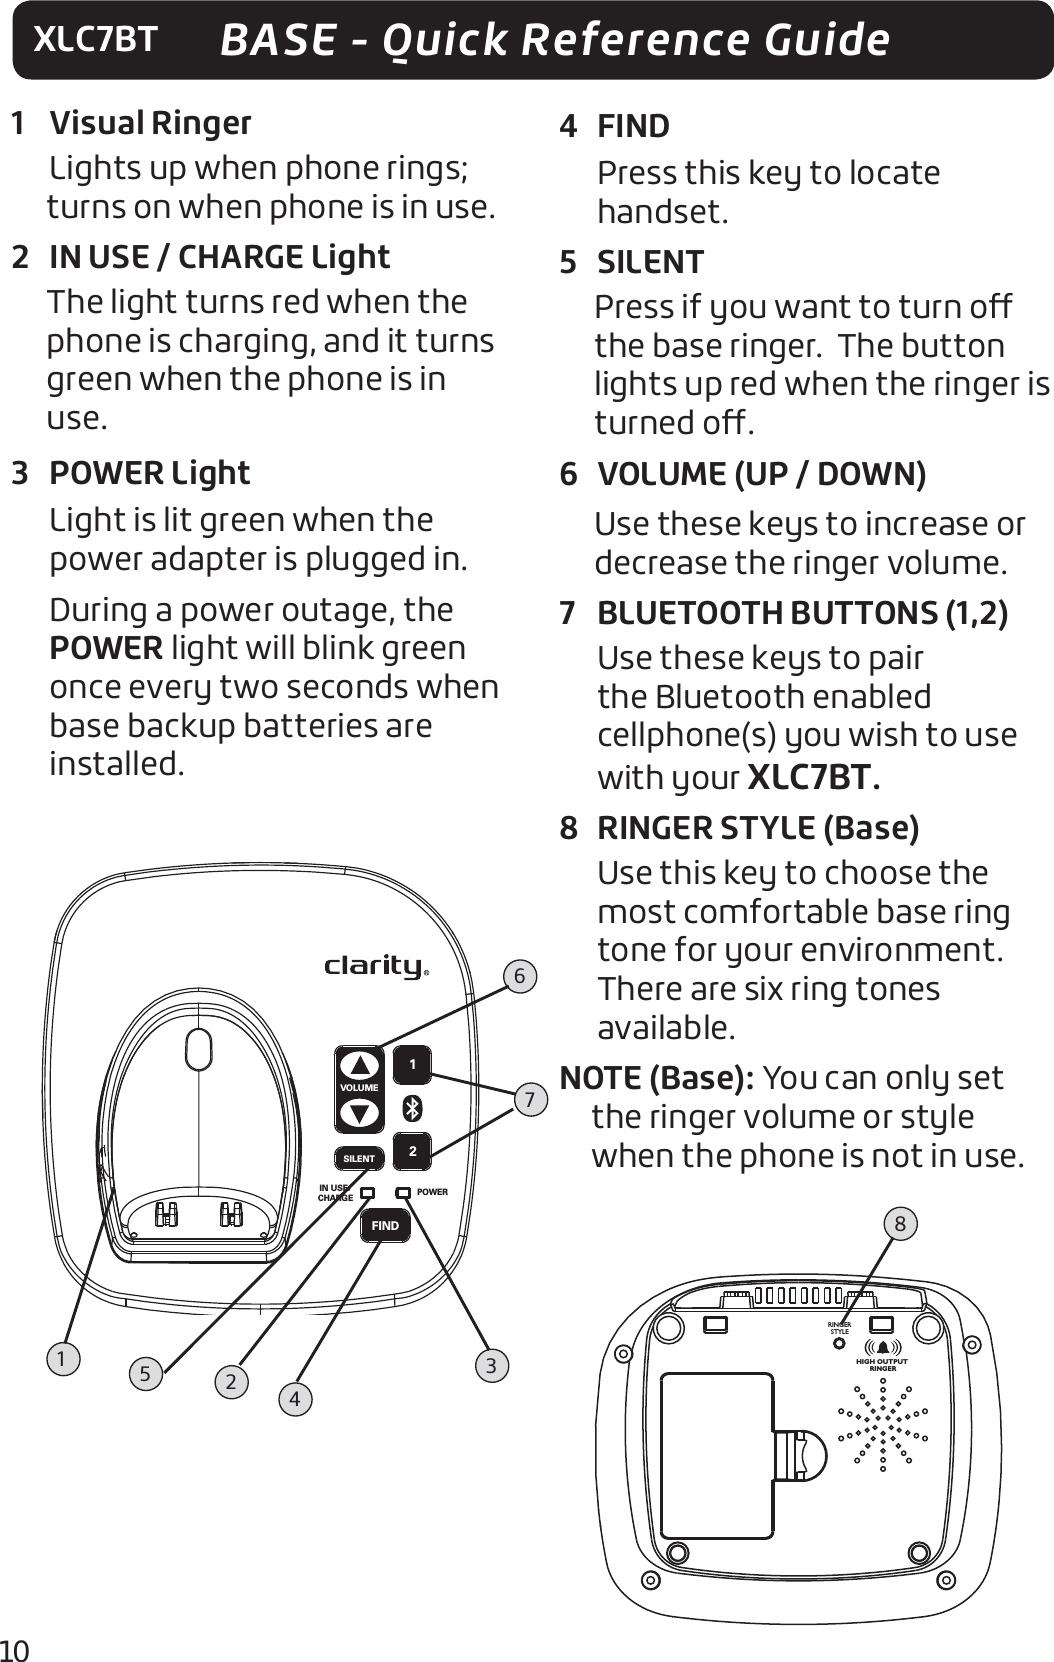 10XLC7BT1 Visual Ringer Lights up when phone rings; turns on when phone is in use.2  IN USE / CHARGE LightThe light turns red when the phone is charging, and it turns green when the phone is in use. 3 POWER LightLight is lit green when the power adapter is plugged in.During a power outage, the POWER light will blink green once every two seconds when base backup batteries are installed.4 FINDPress this key to locate handset. 5   SILENTPress if you want to turn o the base ringer.  The button lights up red when the ringer is turned o.6  VOLUME (UP / DOWN)Use these keys to increase or decrease the ringer volume.7  BLUETOOTH BUTTONS (1,2)Use these keys to pair the Bluetooth enabled cellphone(s) you wish to use with your XLC7BT.8  RINGER STYLE (Base)Use this key to choose the most comfortable base ring tone for your environment. There are six ring tones available.NOTE (Base): You can only set the ringer volume or style when the phone is not in use.IN USE/CHARGE POWERFIND21VOLUMESILENT1284356RINGERSTYLEHIGH OUTPUT RINGERBASE - Quick Reference Guide7